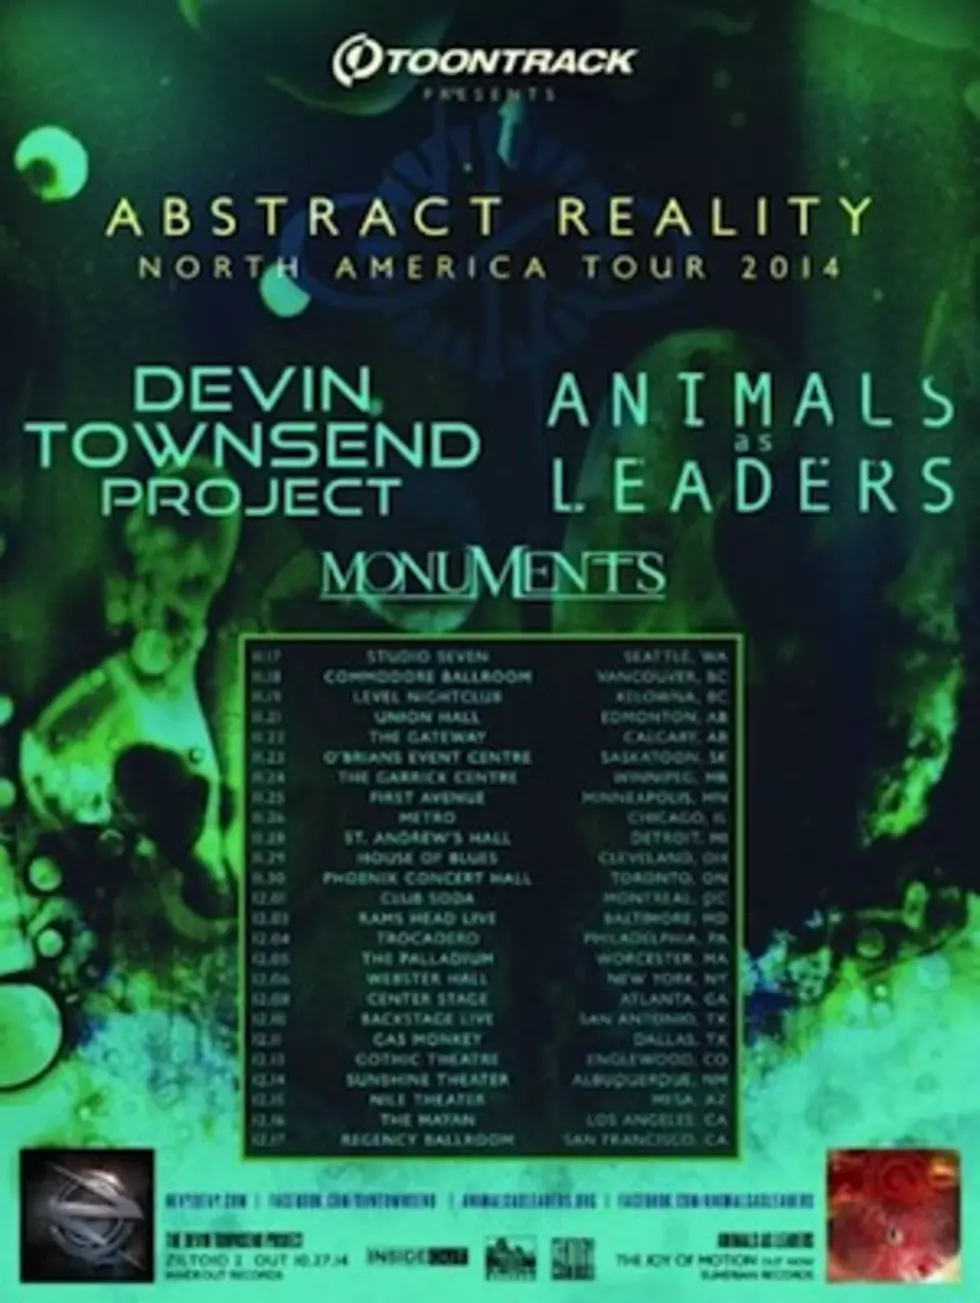 Animals as Leaders, Devin Townsend Project, Monuments Reveal 2014 North American Tour